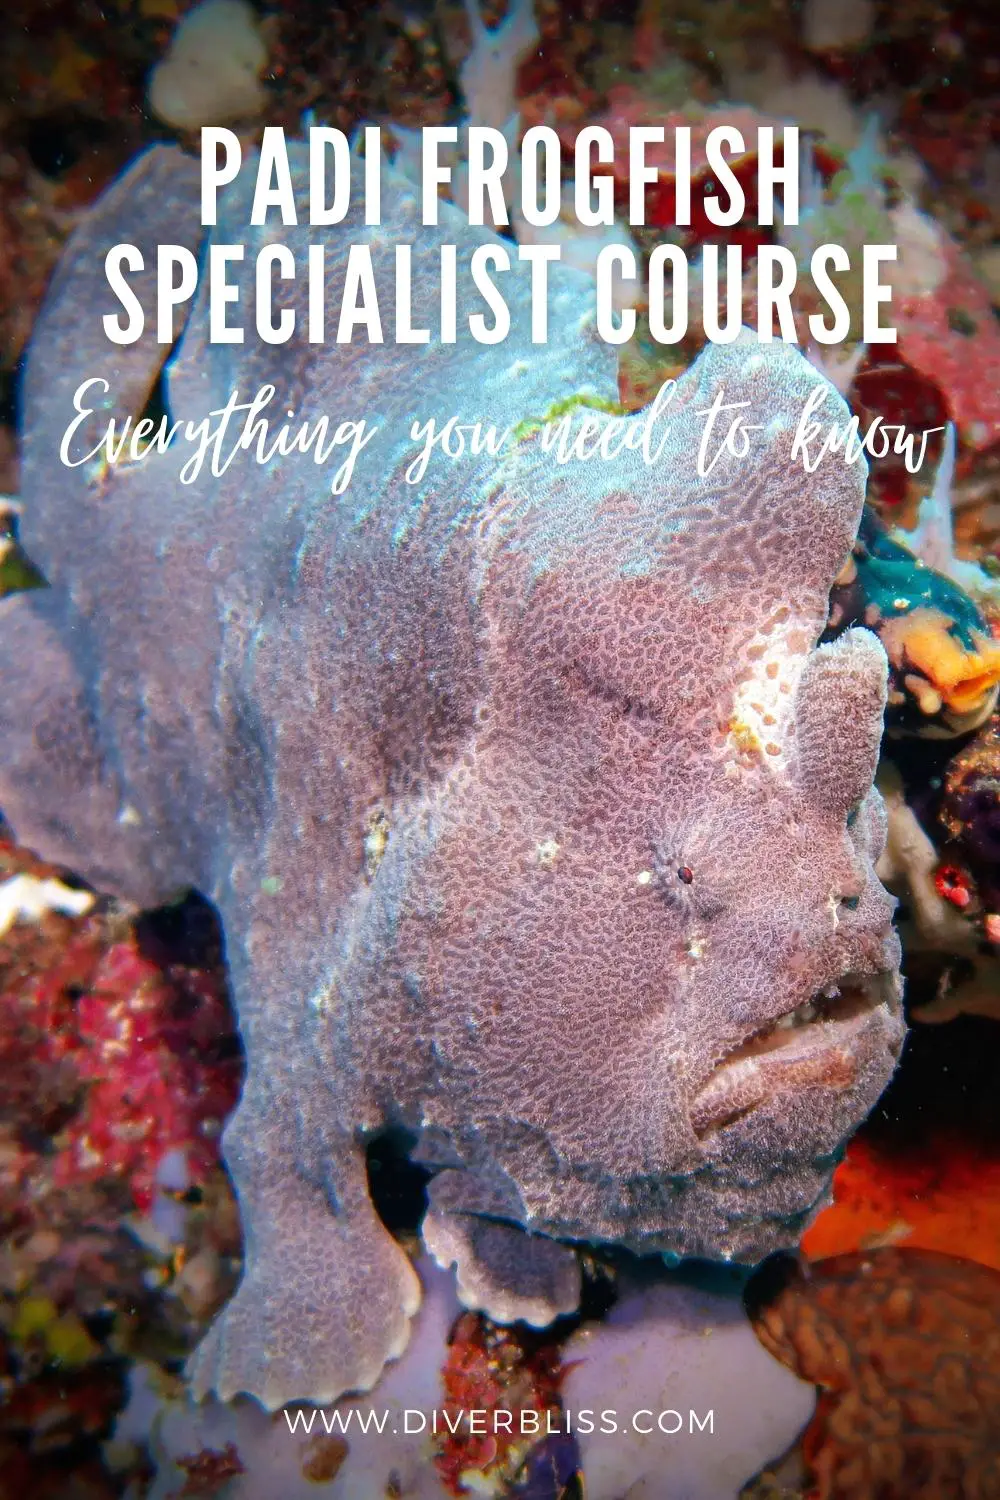 PADI Frogfish Specialist Course